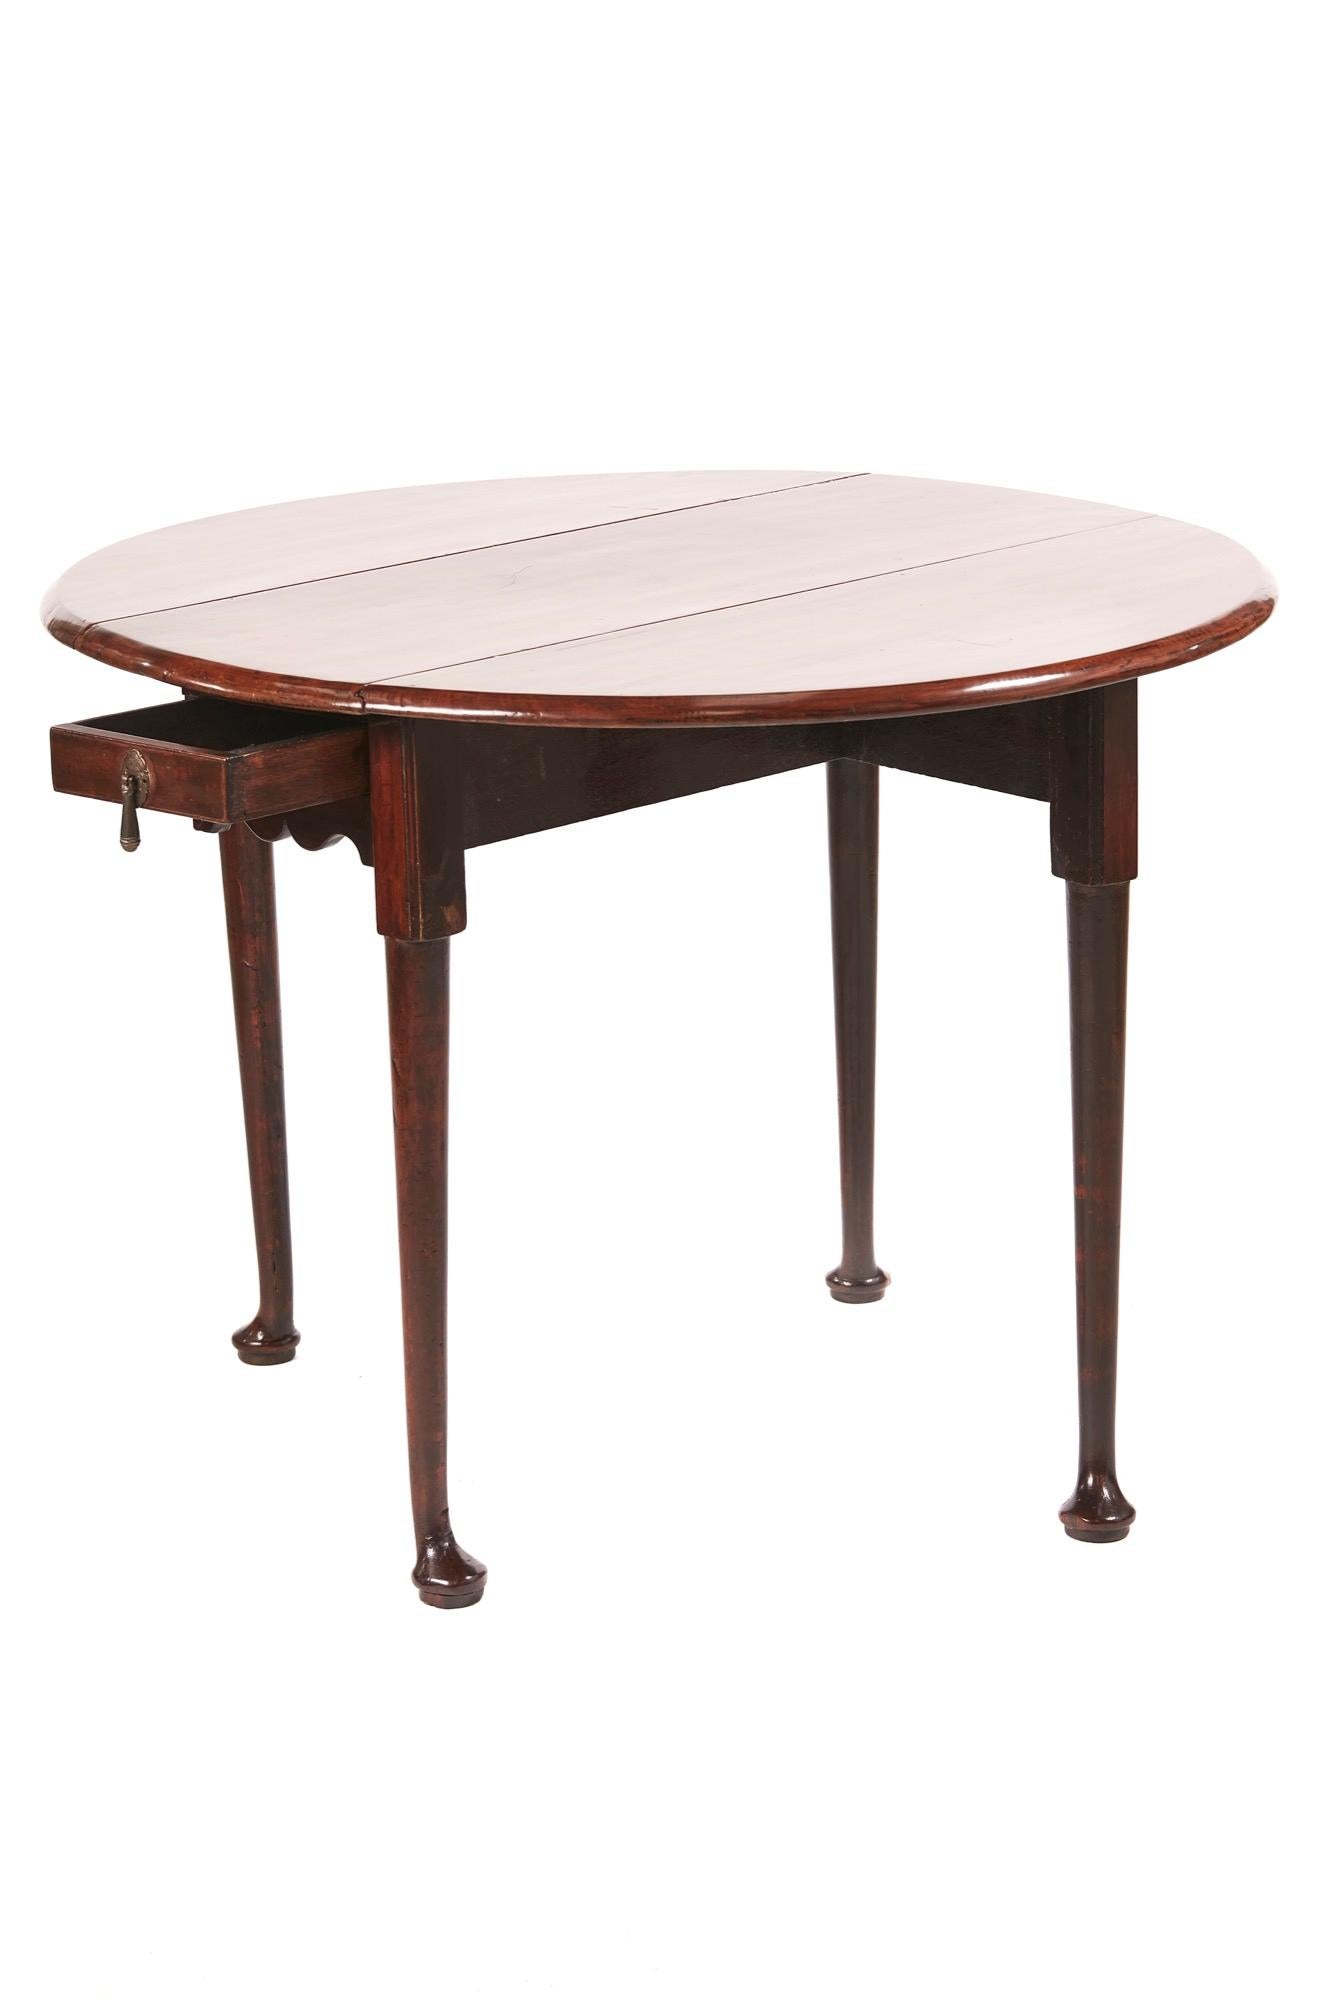 George III mahogany drop leaf dining table, having a lovely quality solid mahogany top with two drop leaves, one drawer to the frieze, supported by four turned legs with pad feet.
Lovely color and condition.
Measures: Open 36